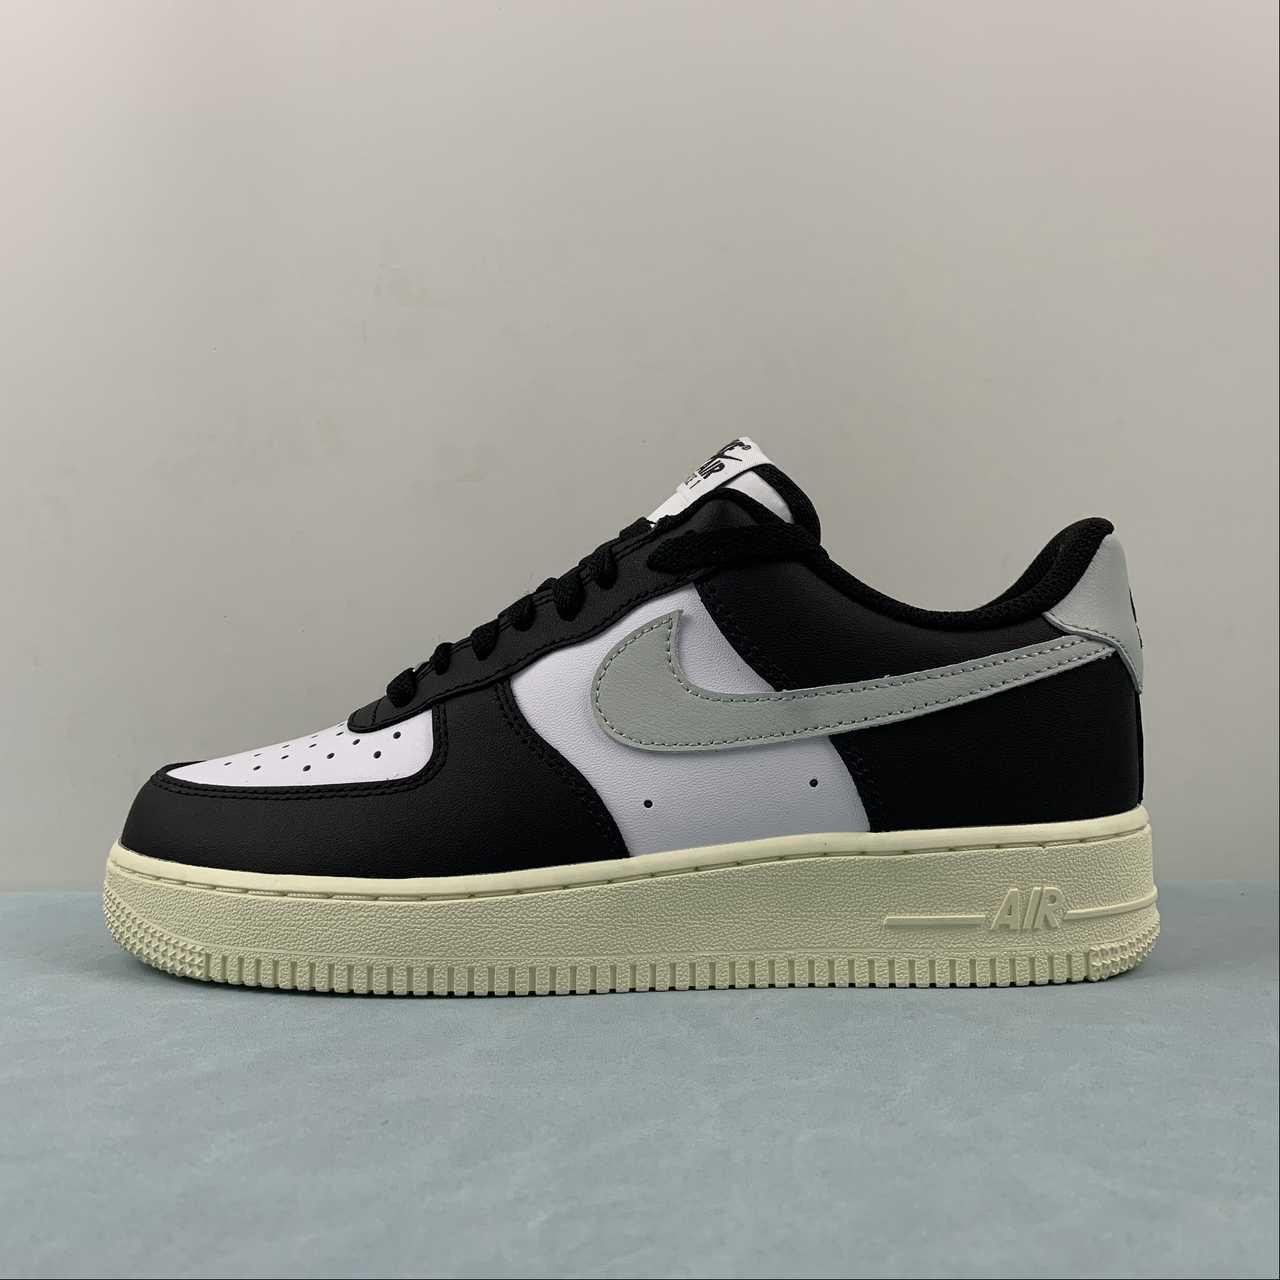 AIR FORCE 1 Air Force low-top casual shoes FQ6848-101 (China Trading ...